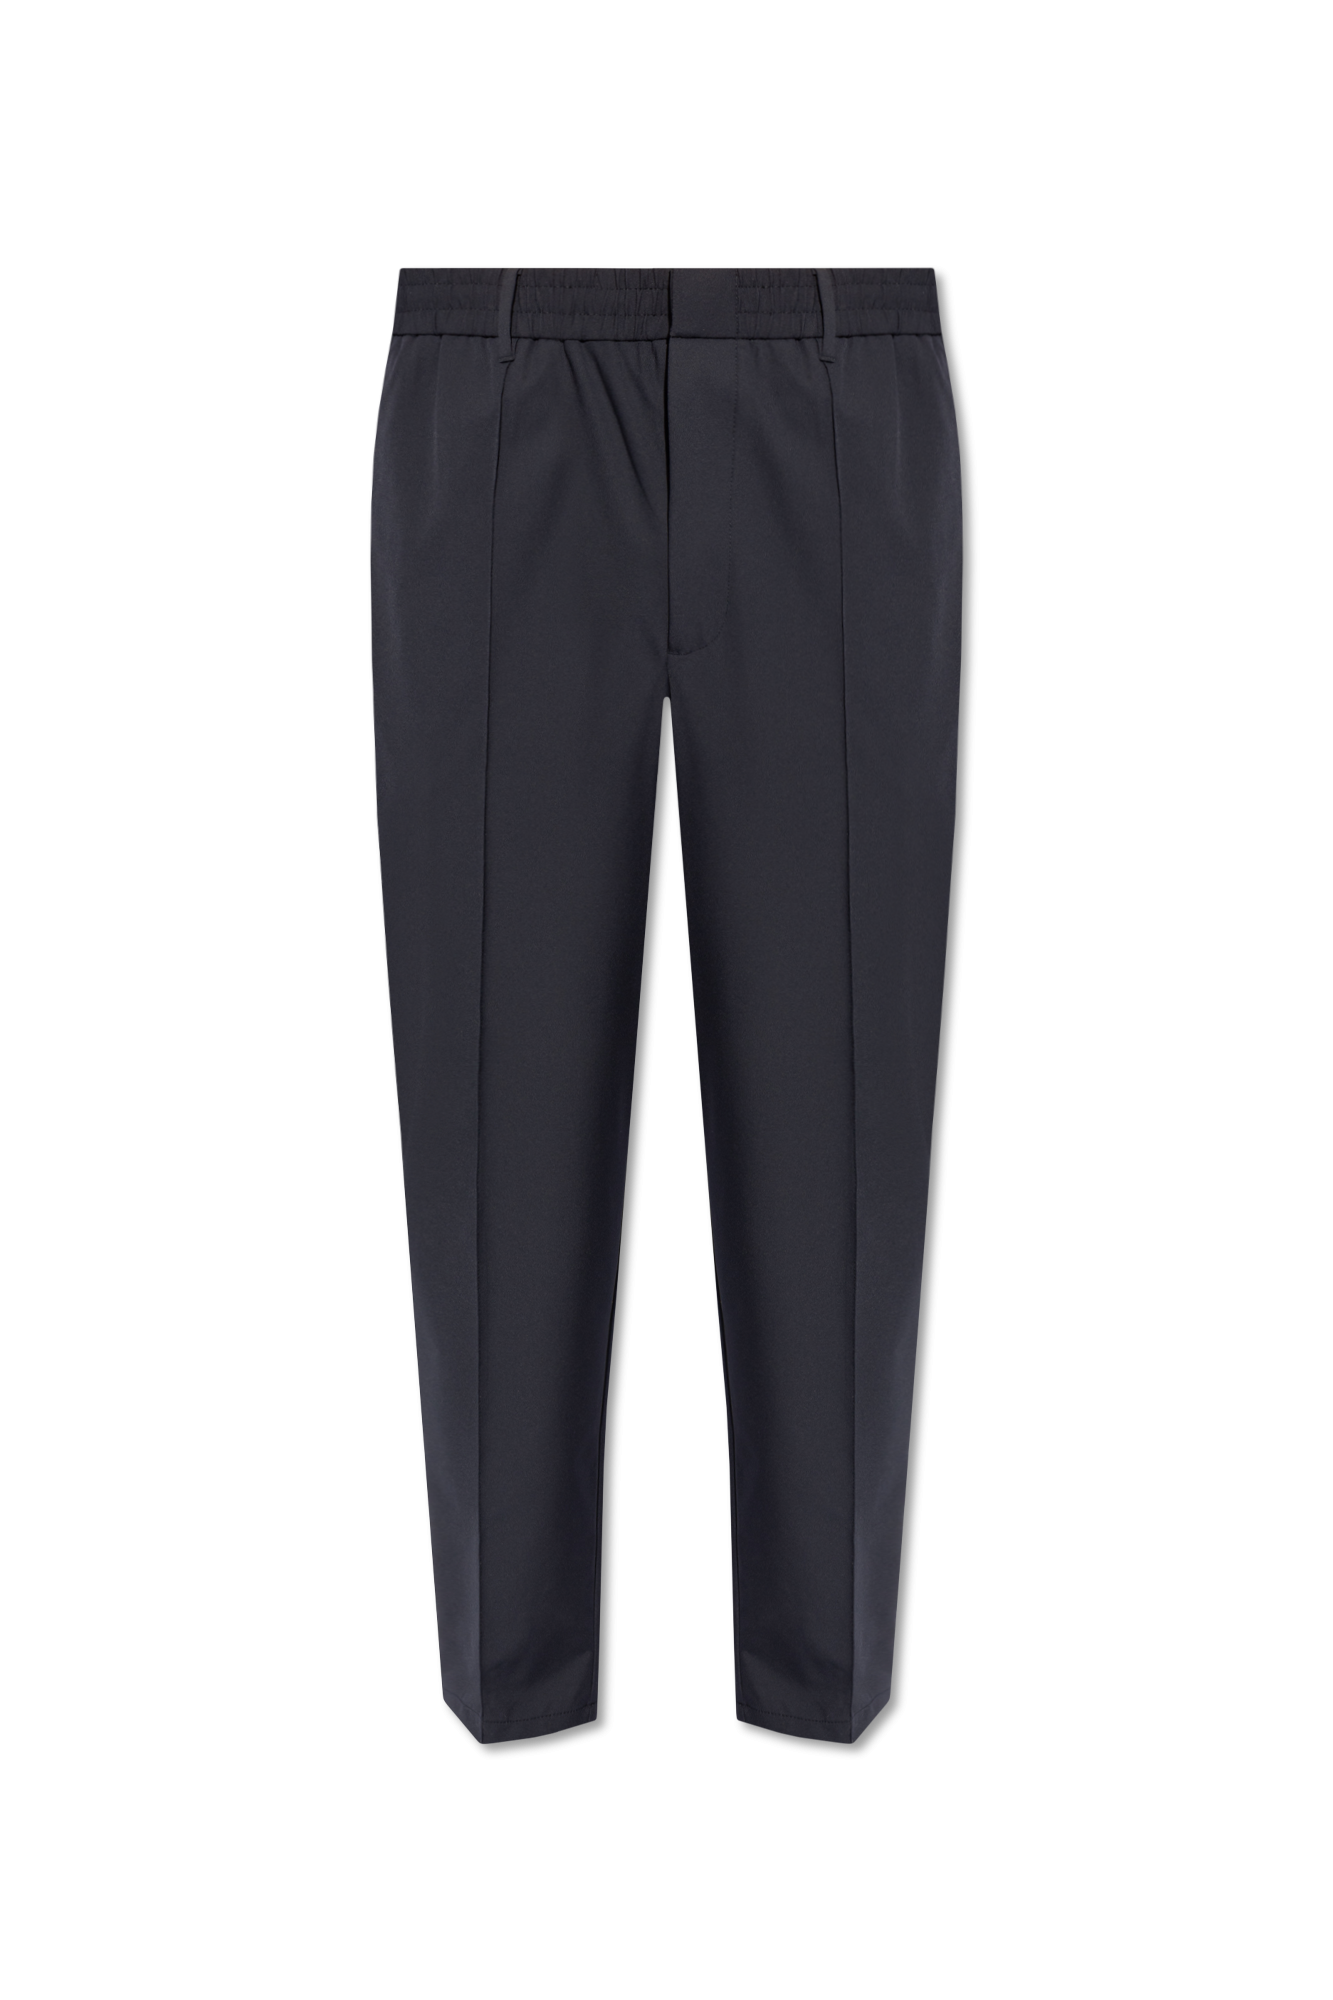 Emporio Armani Trousers with stitching on the legs | Men's Clothing ...